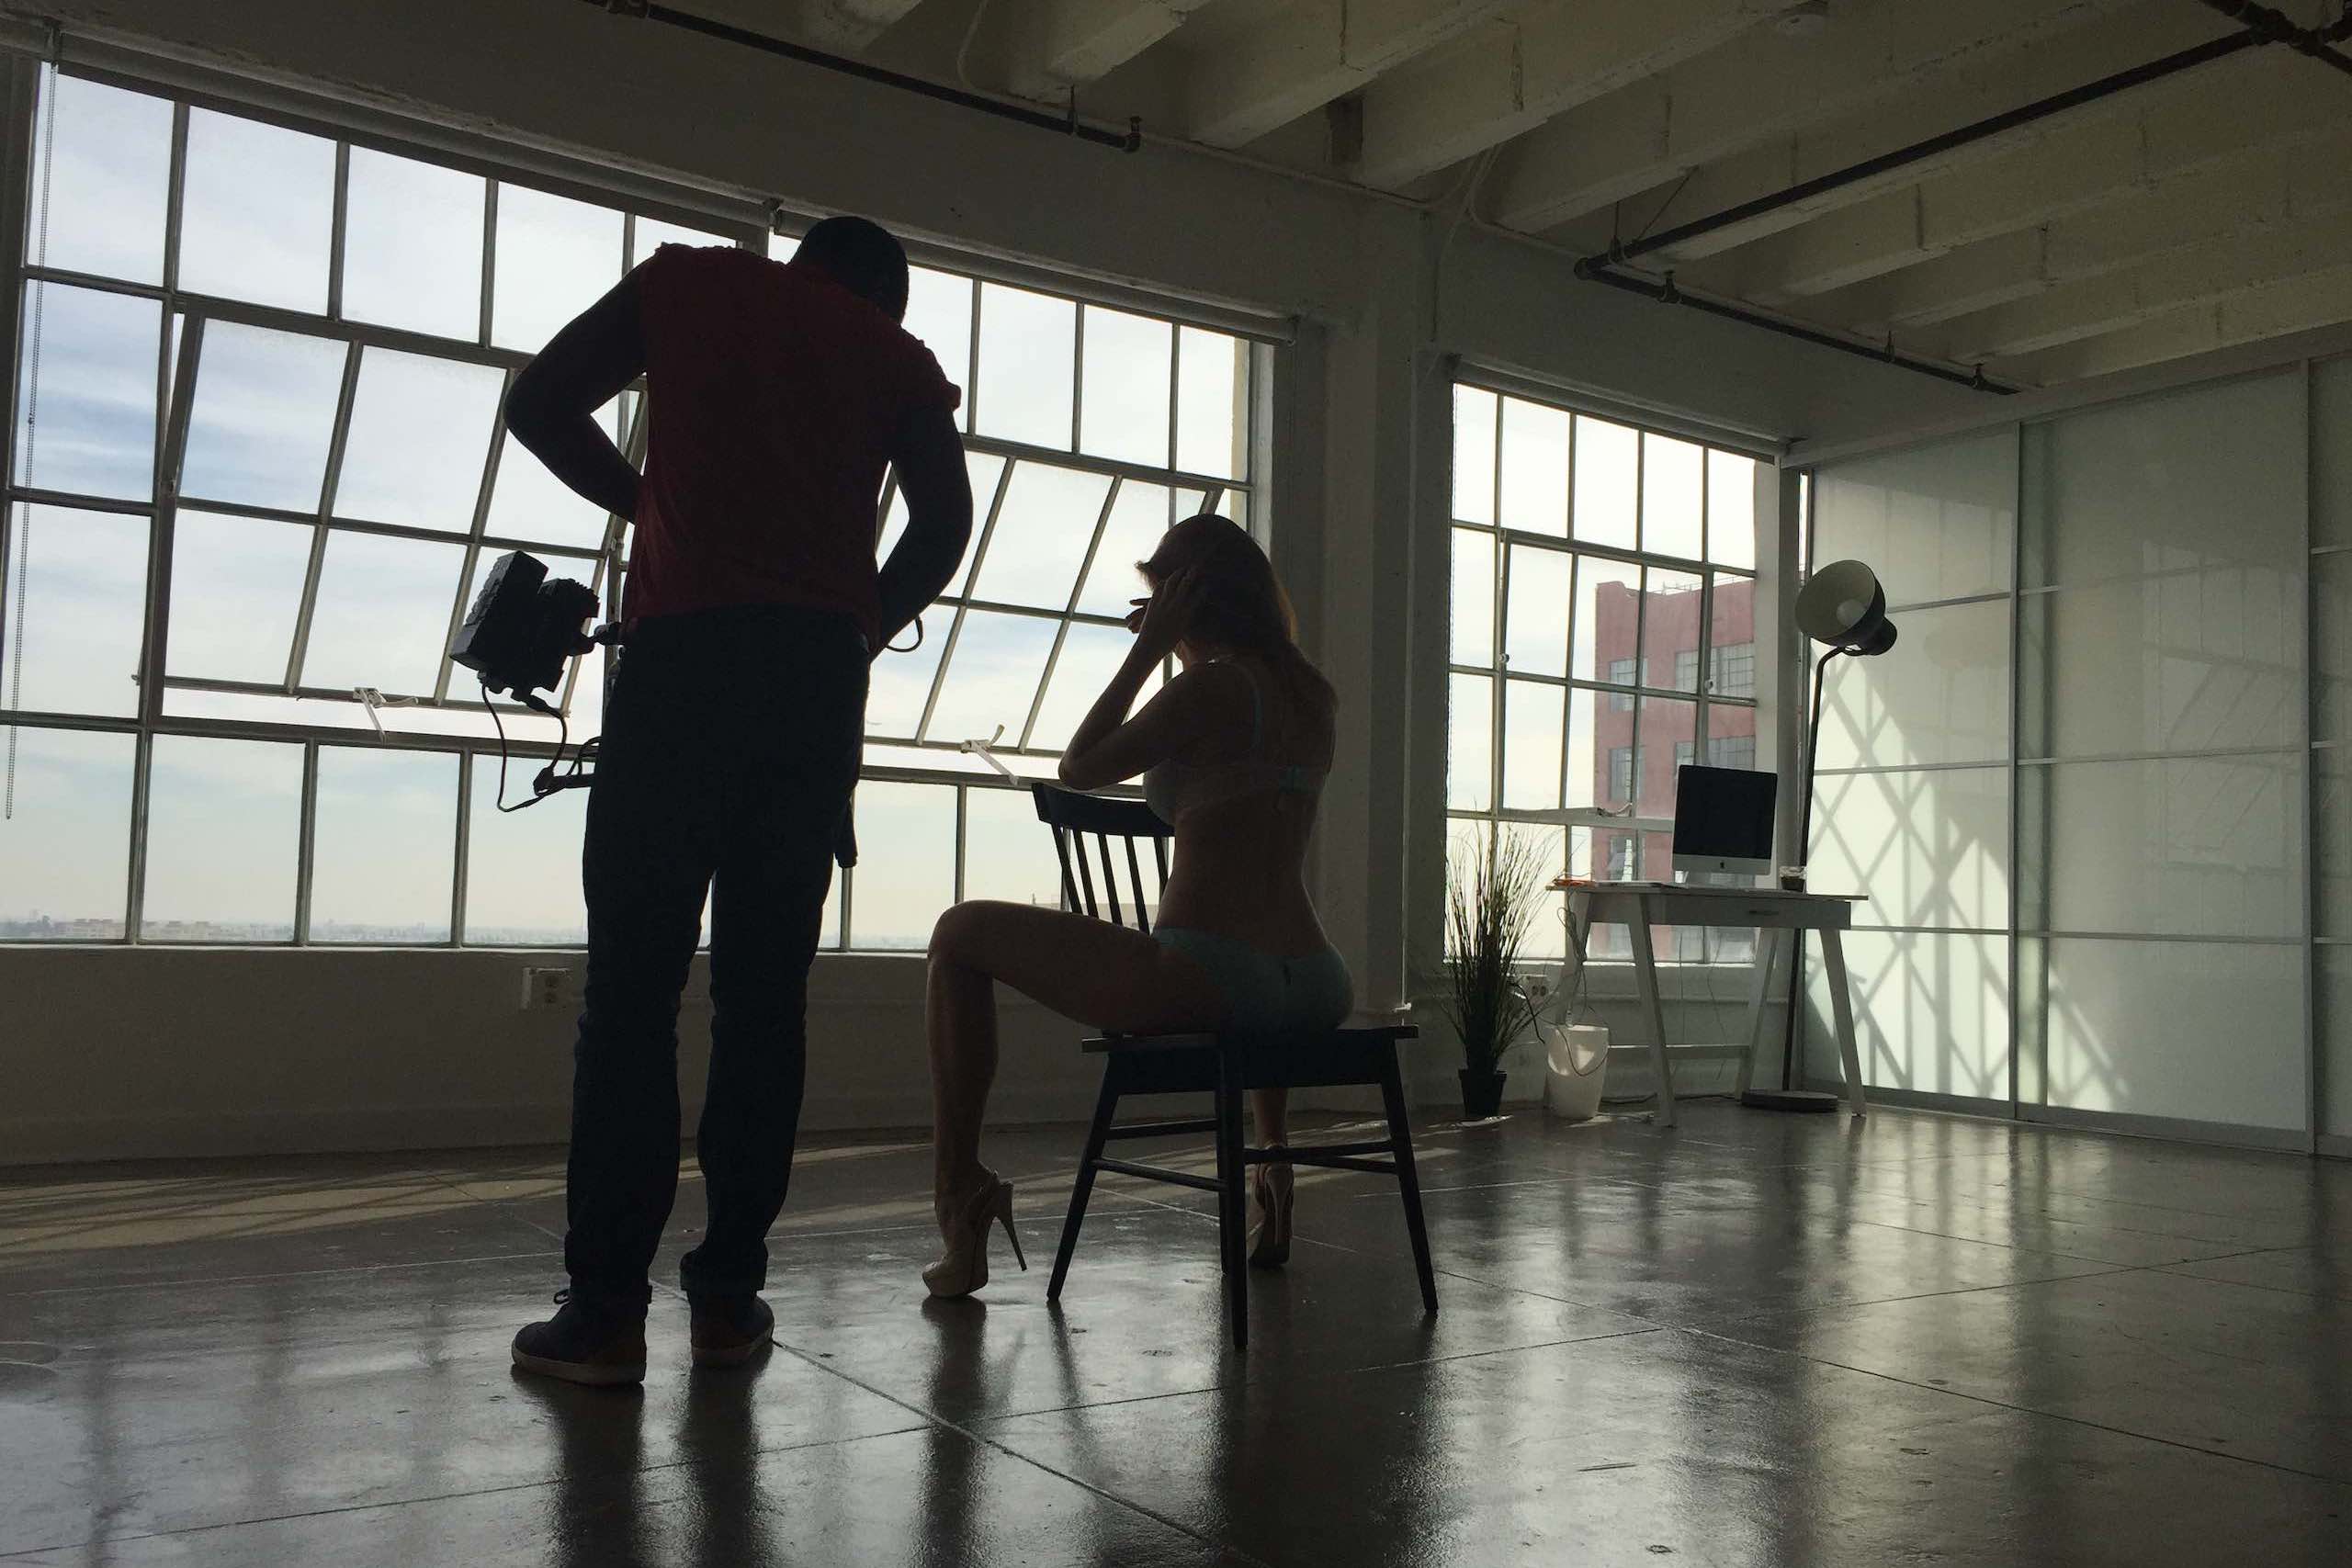 Production Resources Studio Loft LA with crew member filming a model sitting on a chair